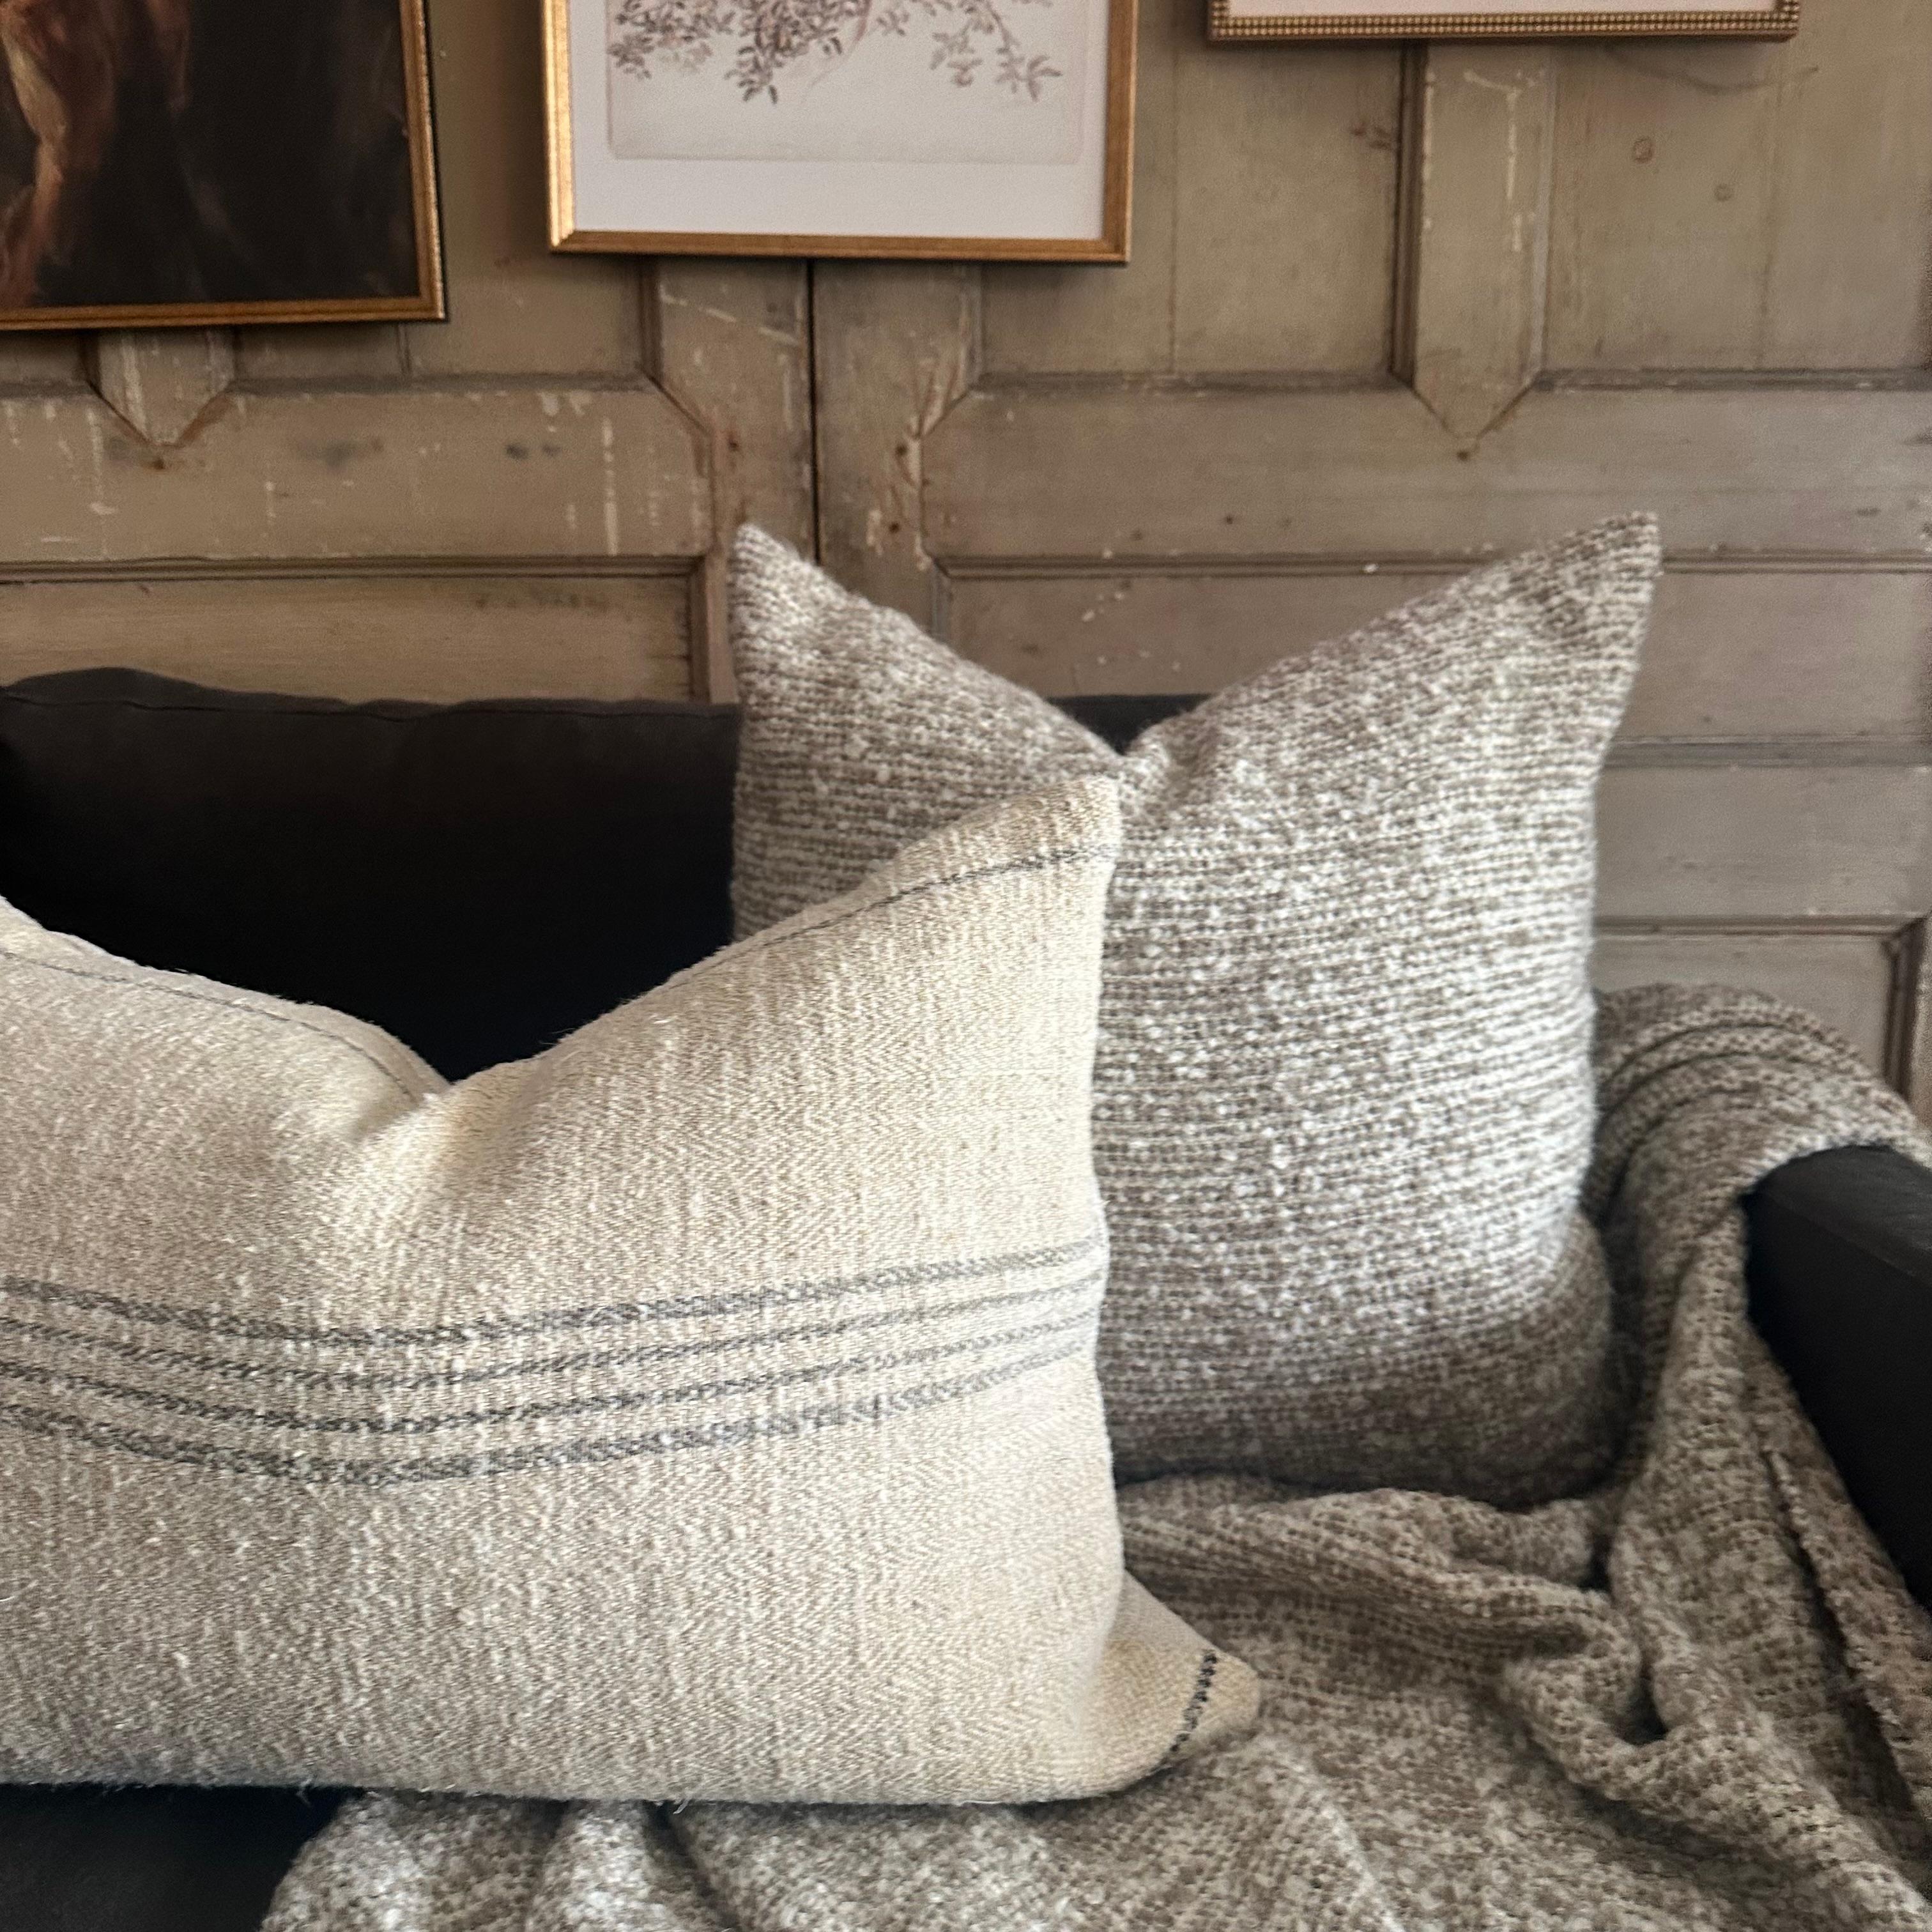 Woven in Belgium the Bell Pillow combines a fluffy boucle wool with a silky soft viscose/linen. 

Content: 41% Viscose / 19% Linen /16% Acrylic /9% Alpaca/ 9% Virgin Wool
4% Polyester/2% Polyamide
Size: 23